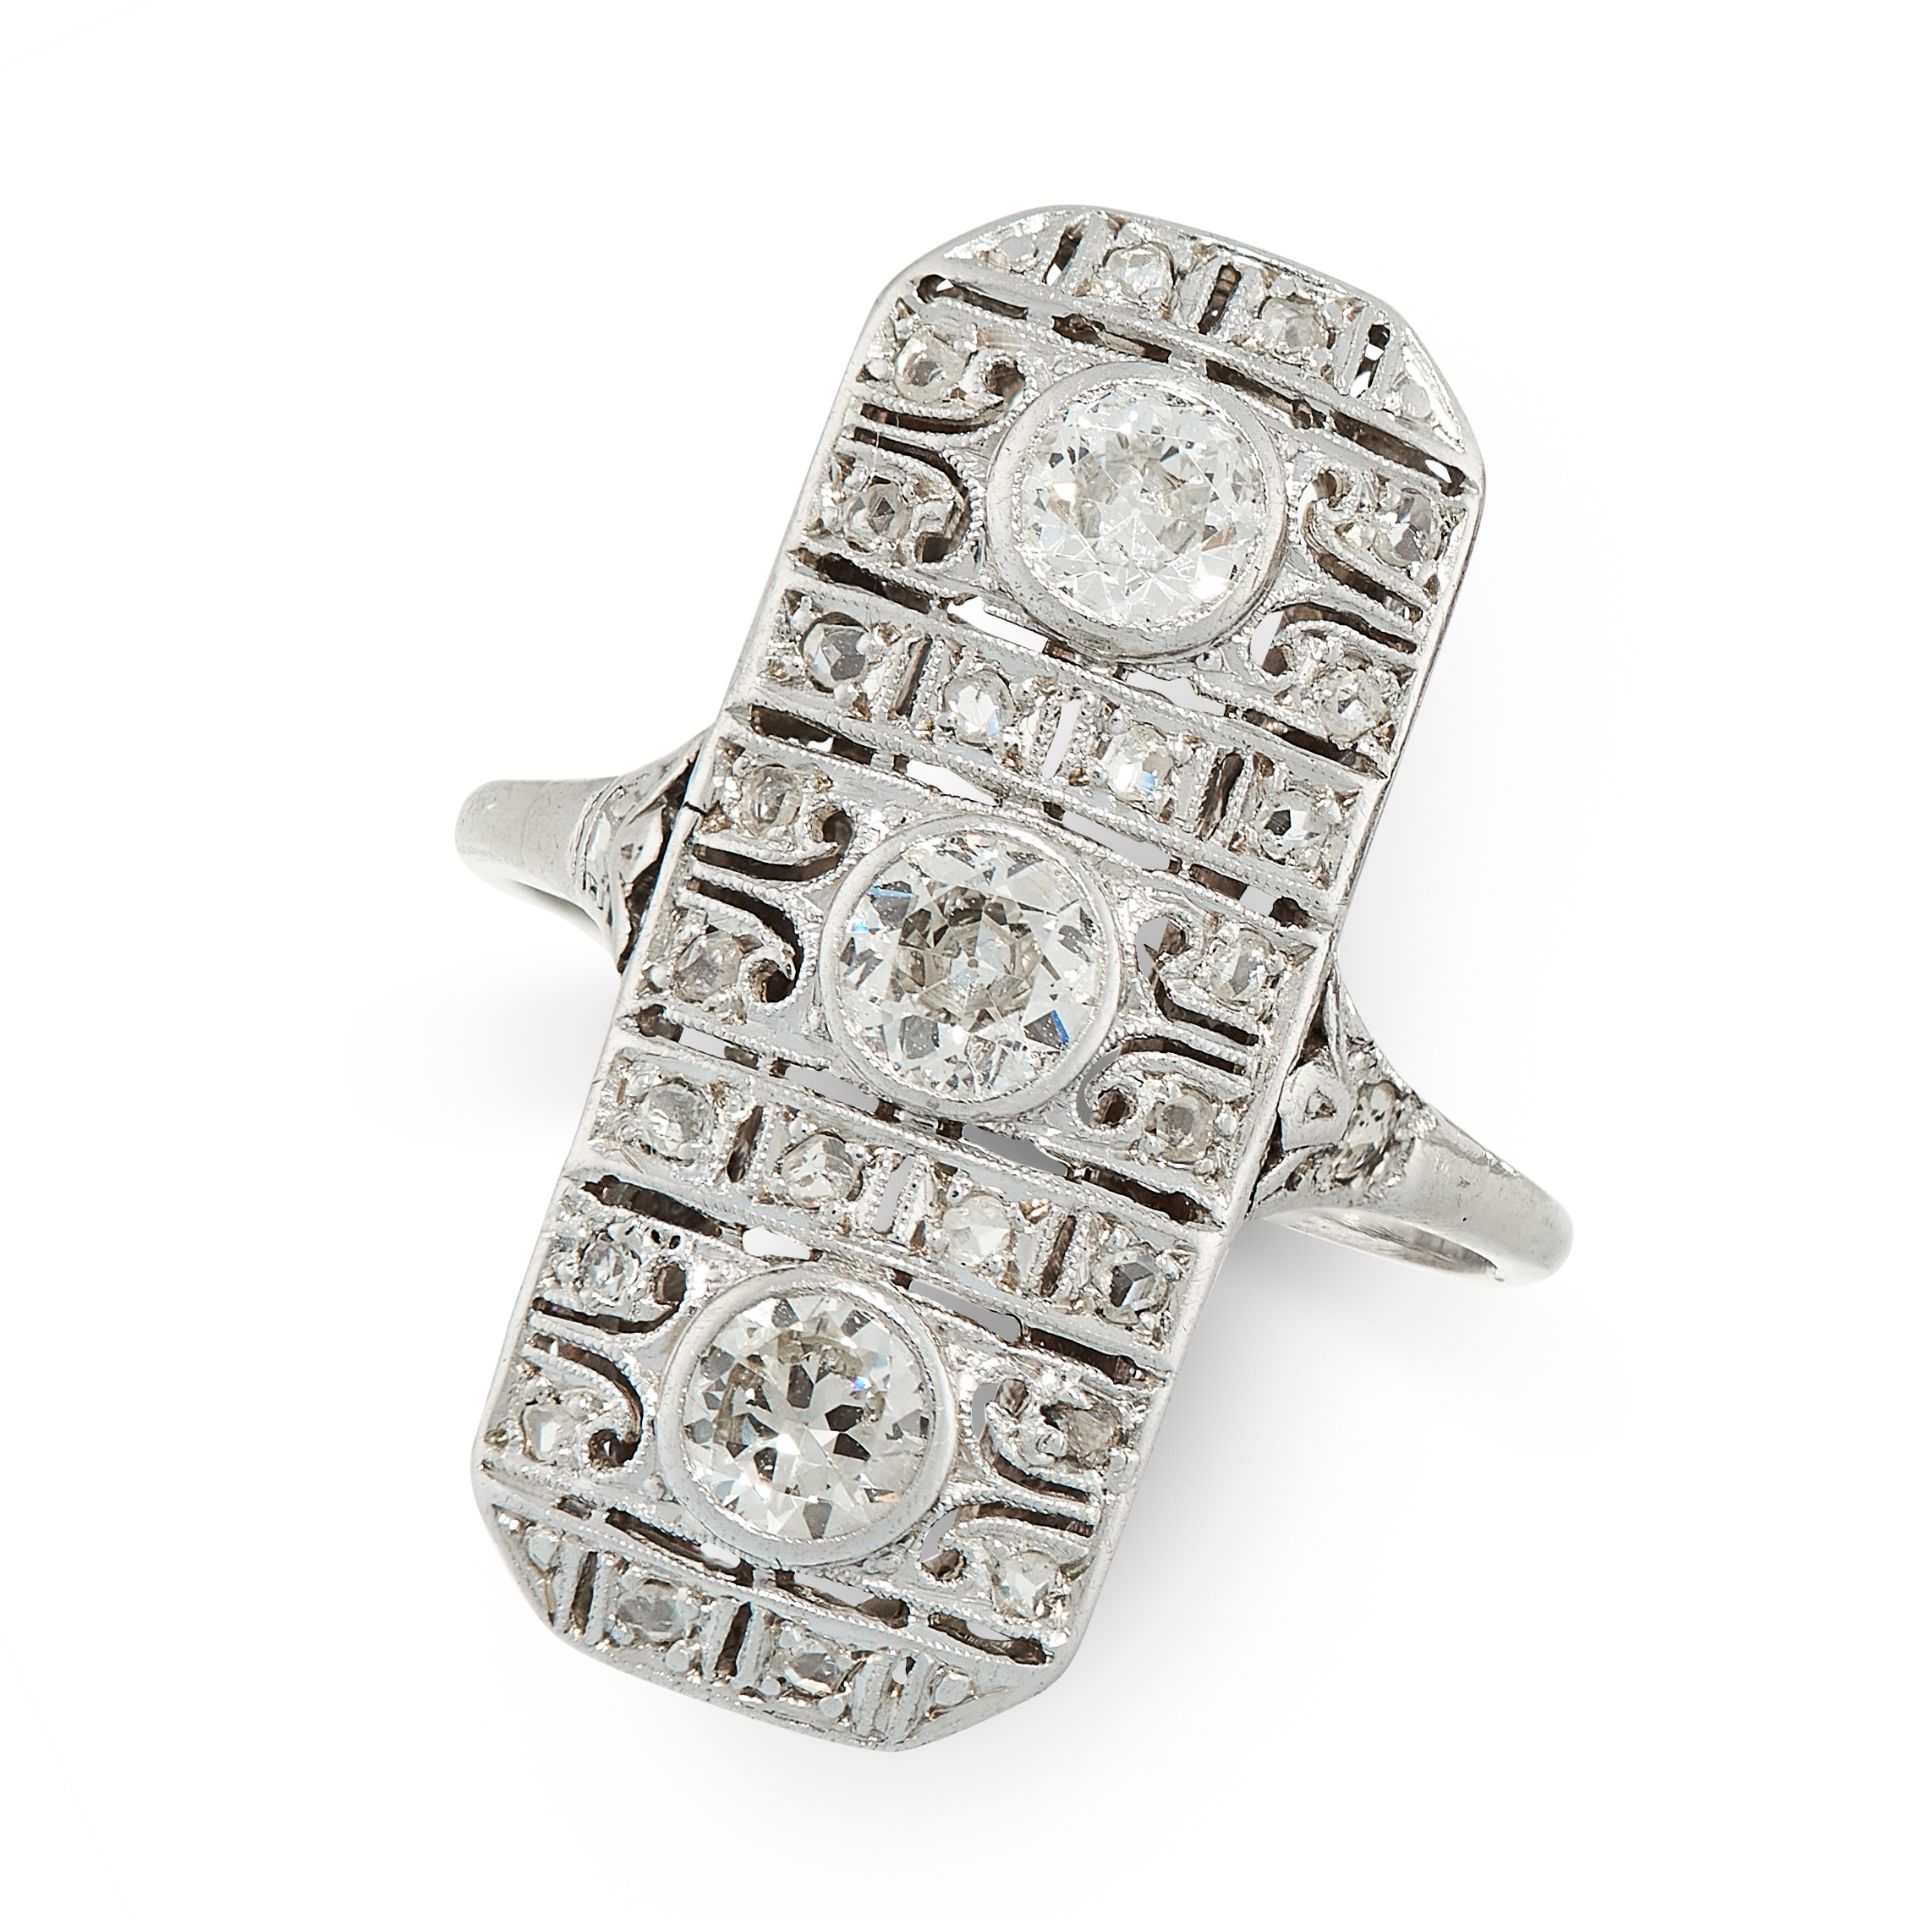 DIAMOND DRESS RING, CIRCA 1940 of plaque design, the face set with a trio of old cut diamonds,